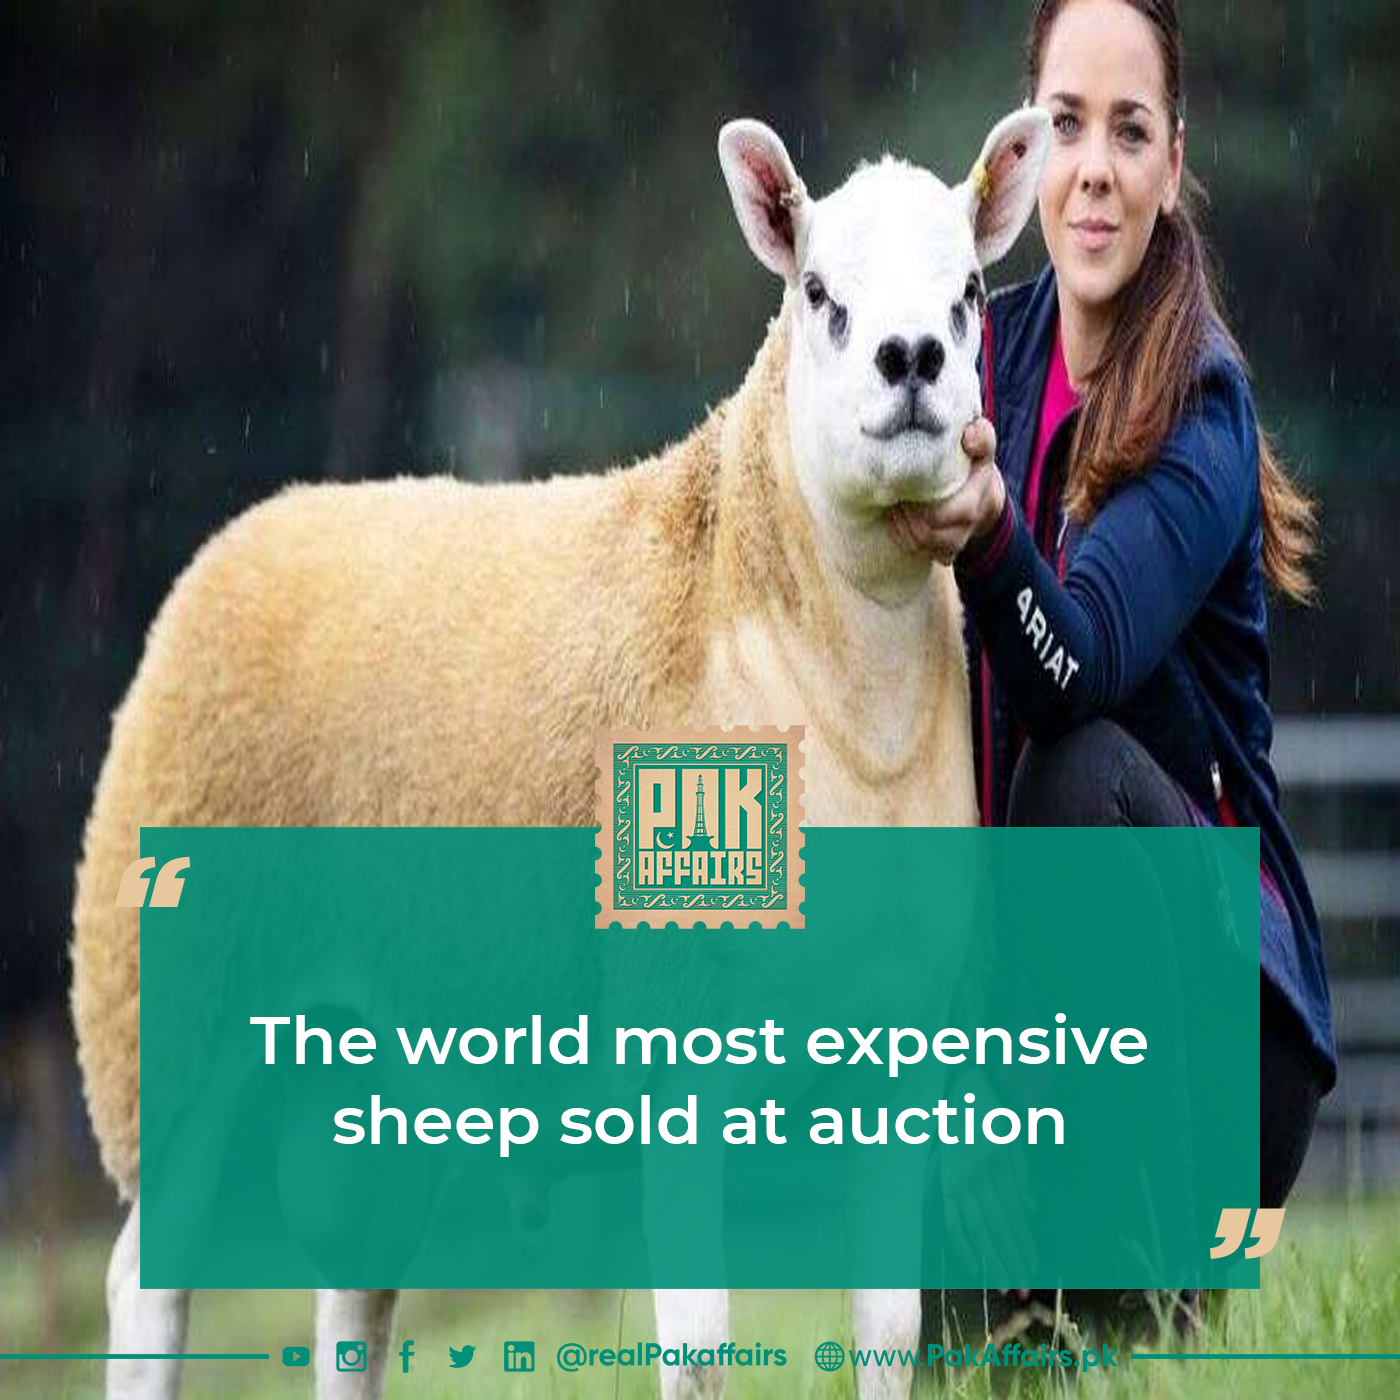 The world most expensive sheep sold at auction